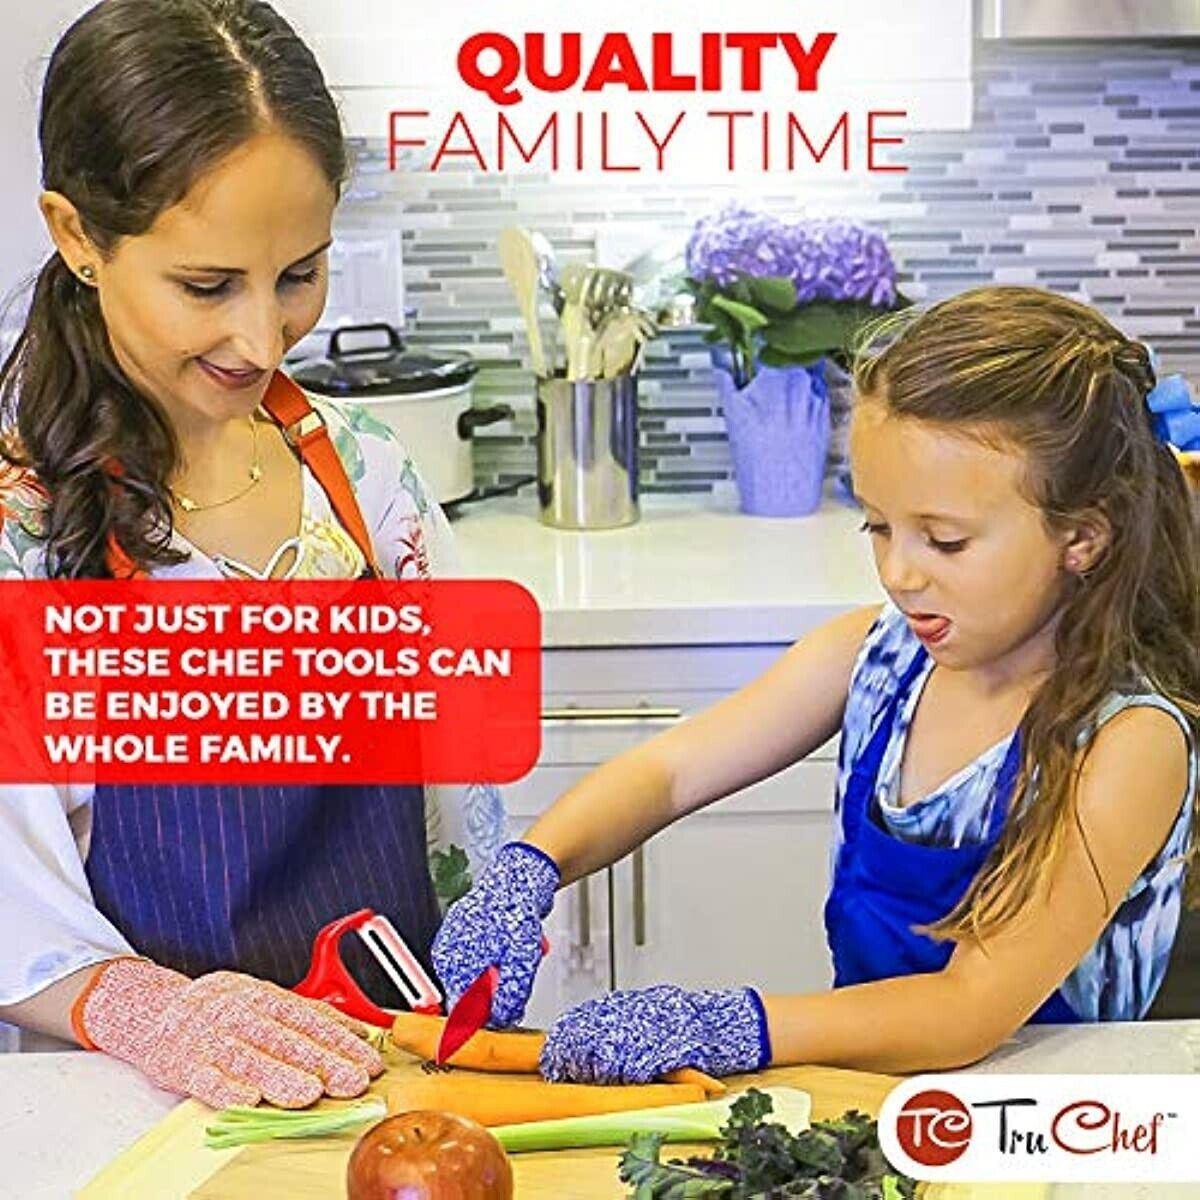 TruChef Kids Knife Set For Cooking – 5 Piece Kids Cook Set in RED Kids Cooking - Australian Empire Shop